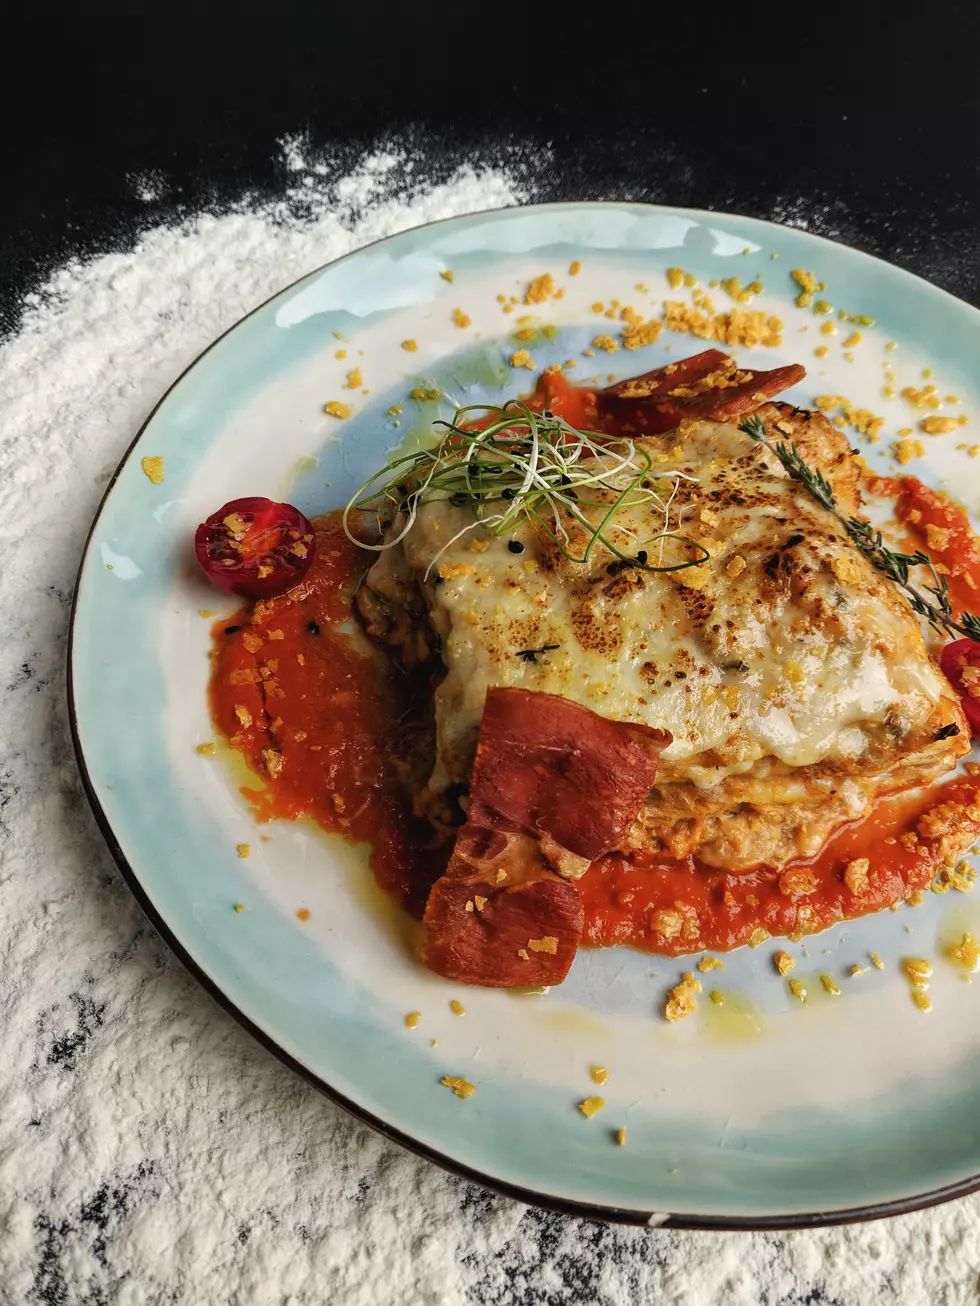 Saucy, Cheesy, Goodness – Here’s Where You Can Eat New Jersey’s Best Lasagna